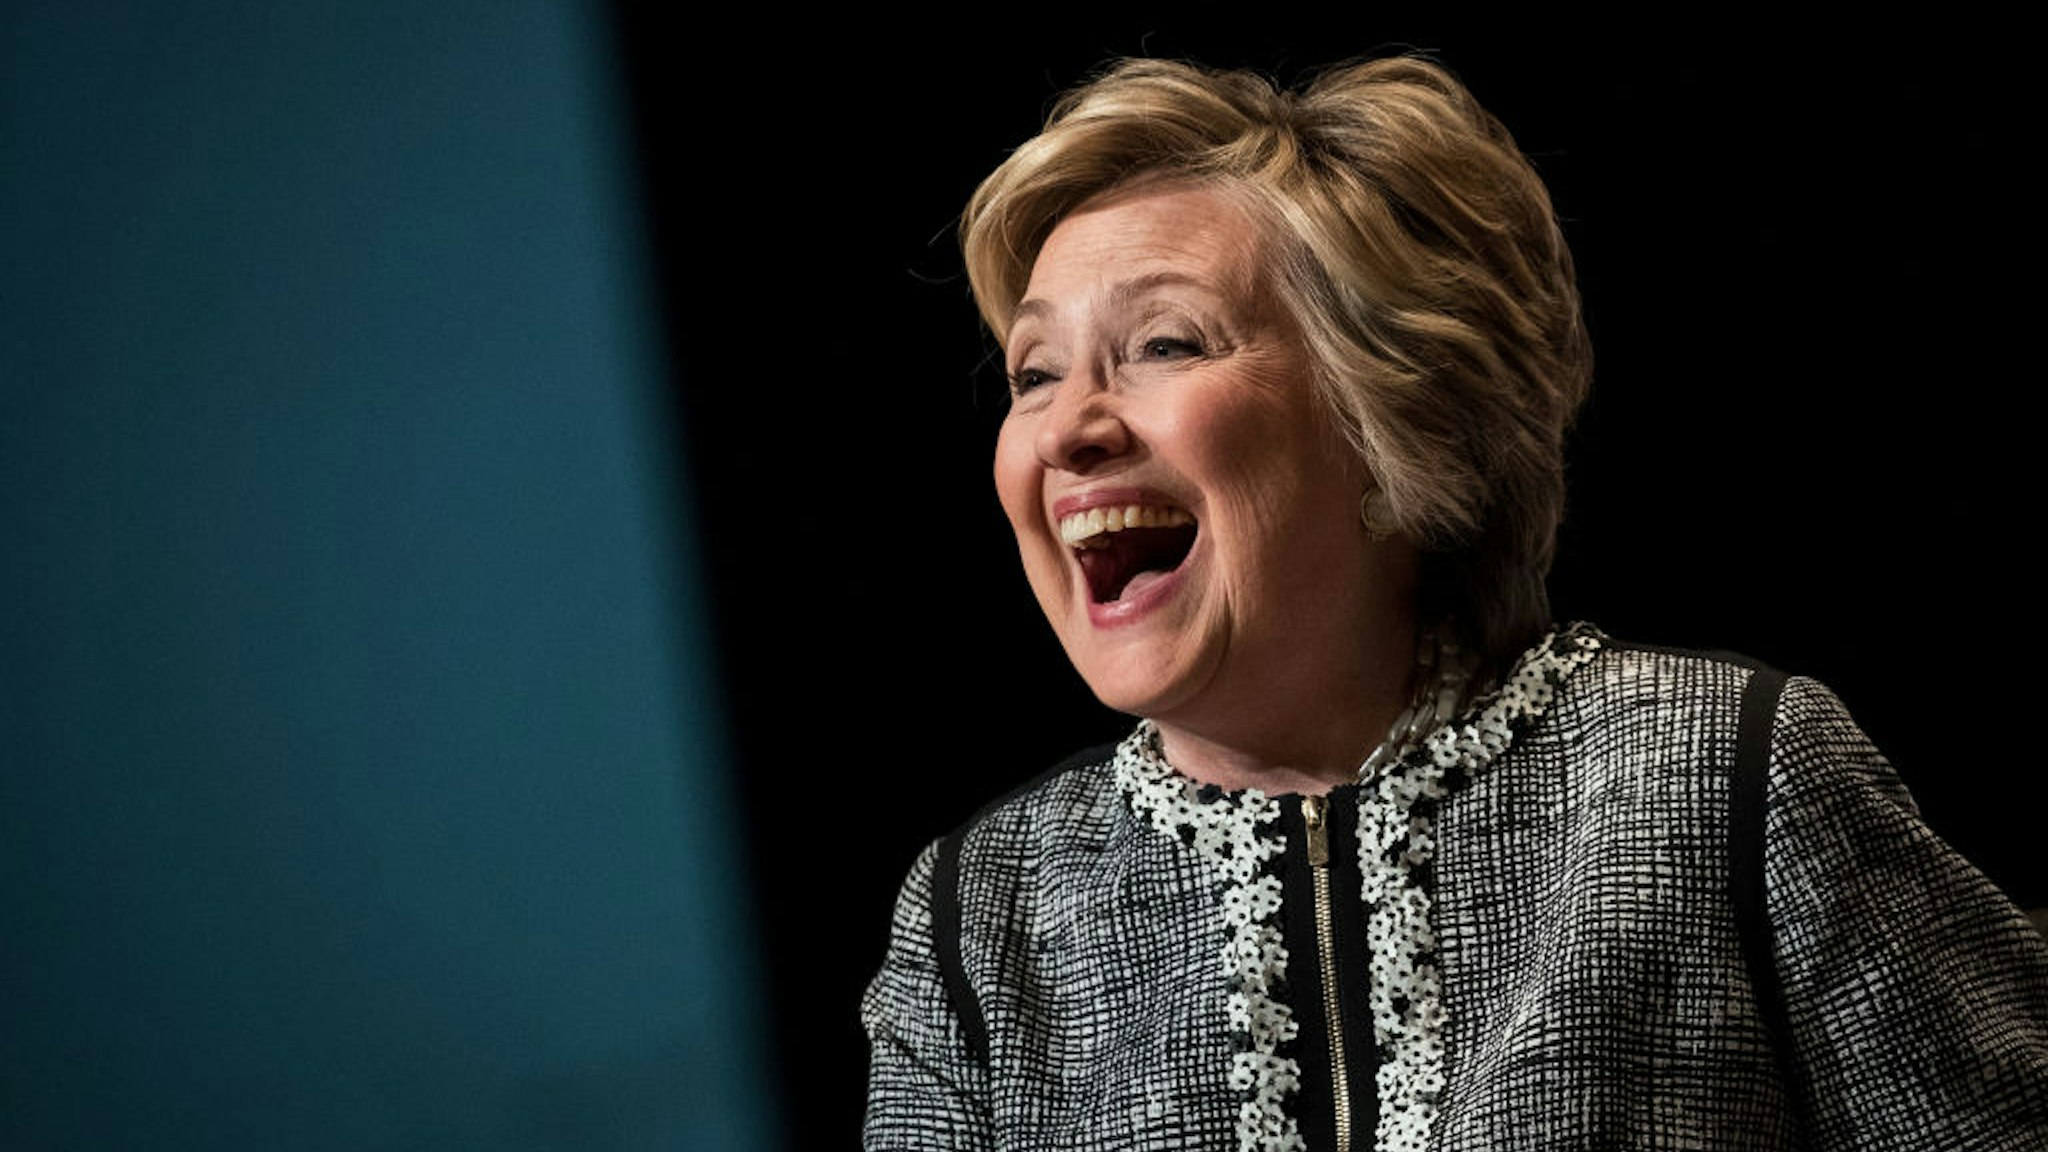 Former U.S. Secretary of State and 2016 presidential candidate Hillary Clinton laughs while speaking during BookExpo 2017 at the Jacob K. Javits Convention Center, June 1, 2017 in New York City.